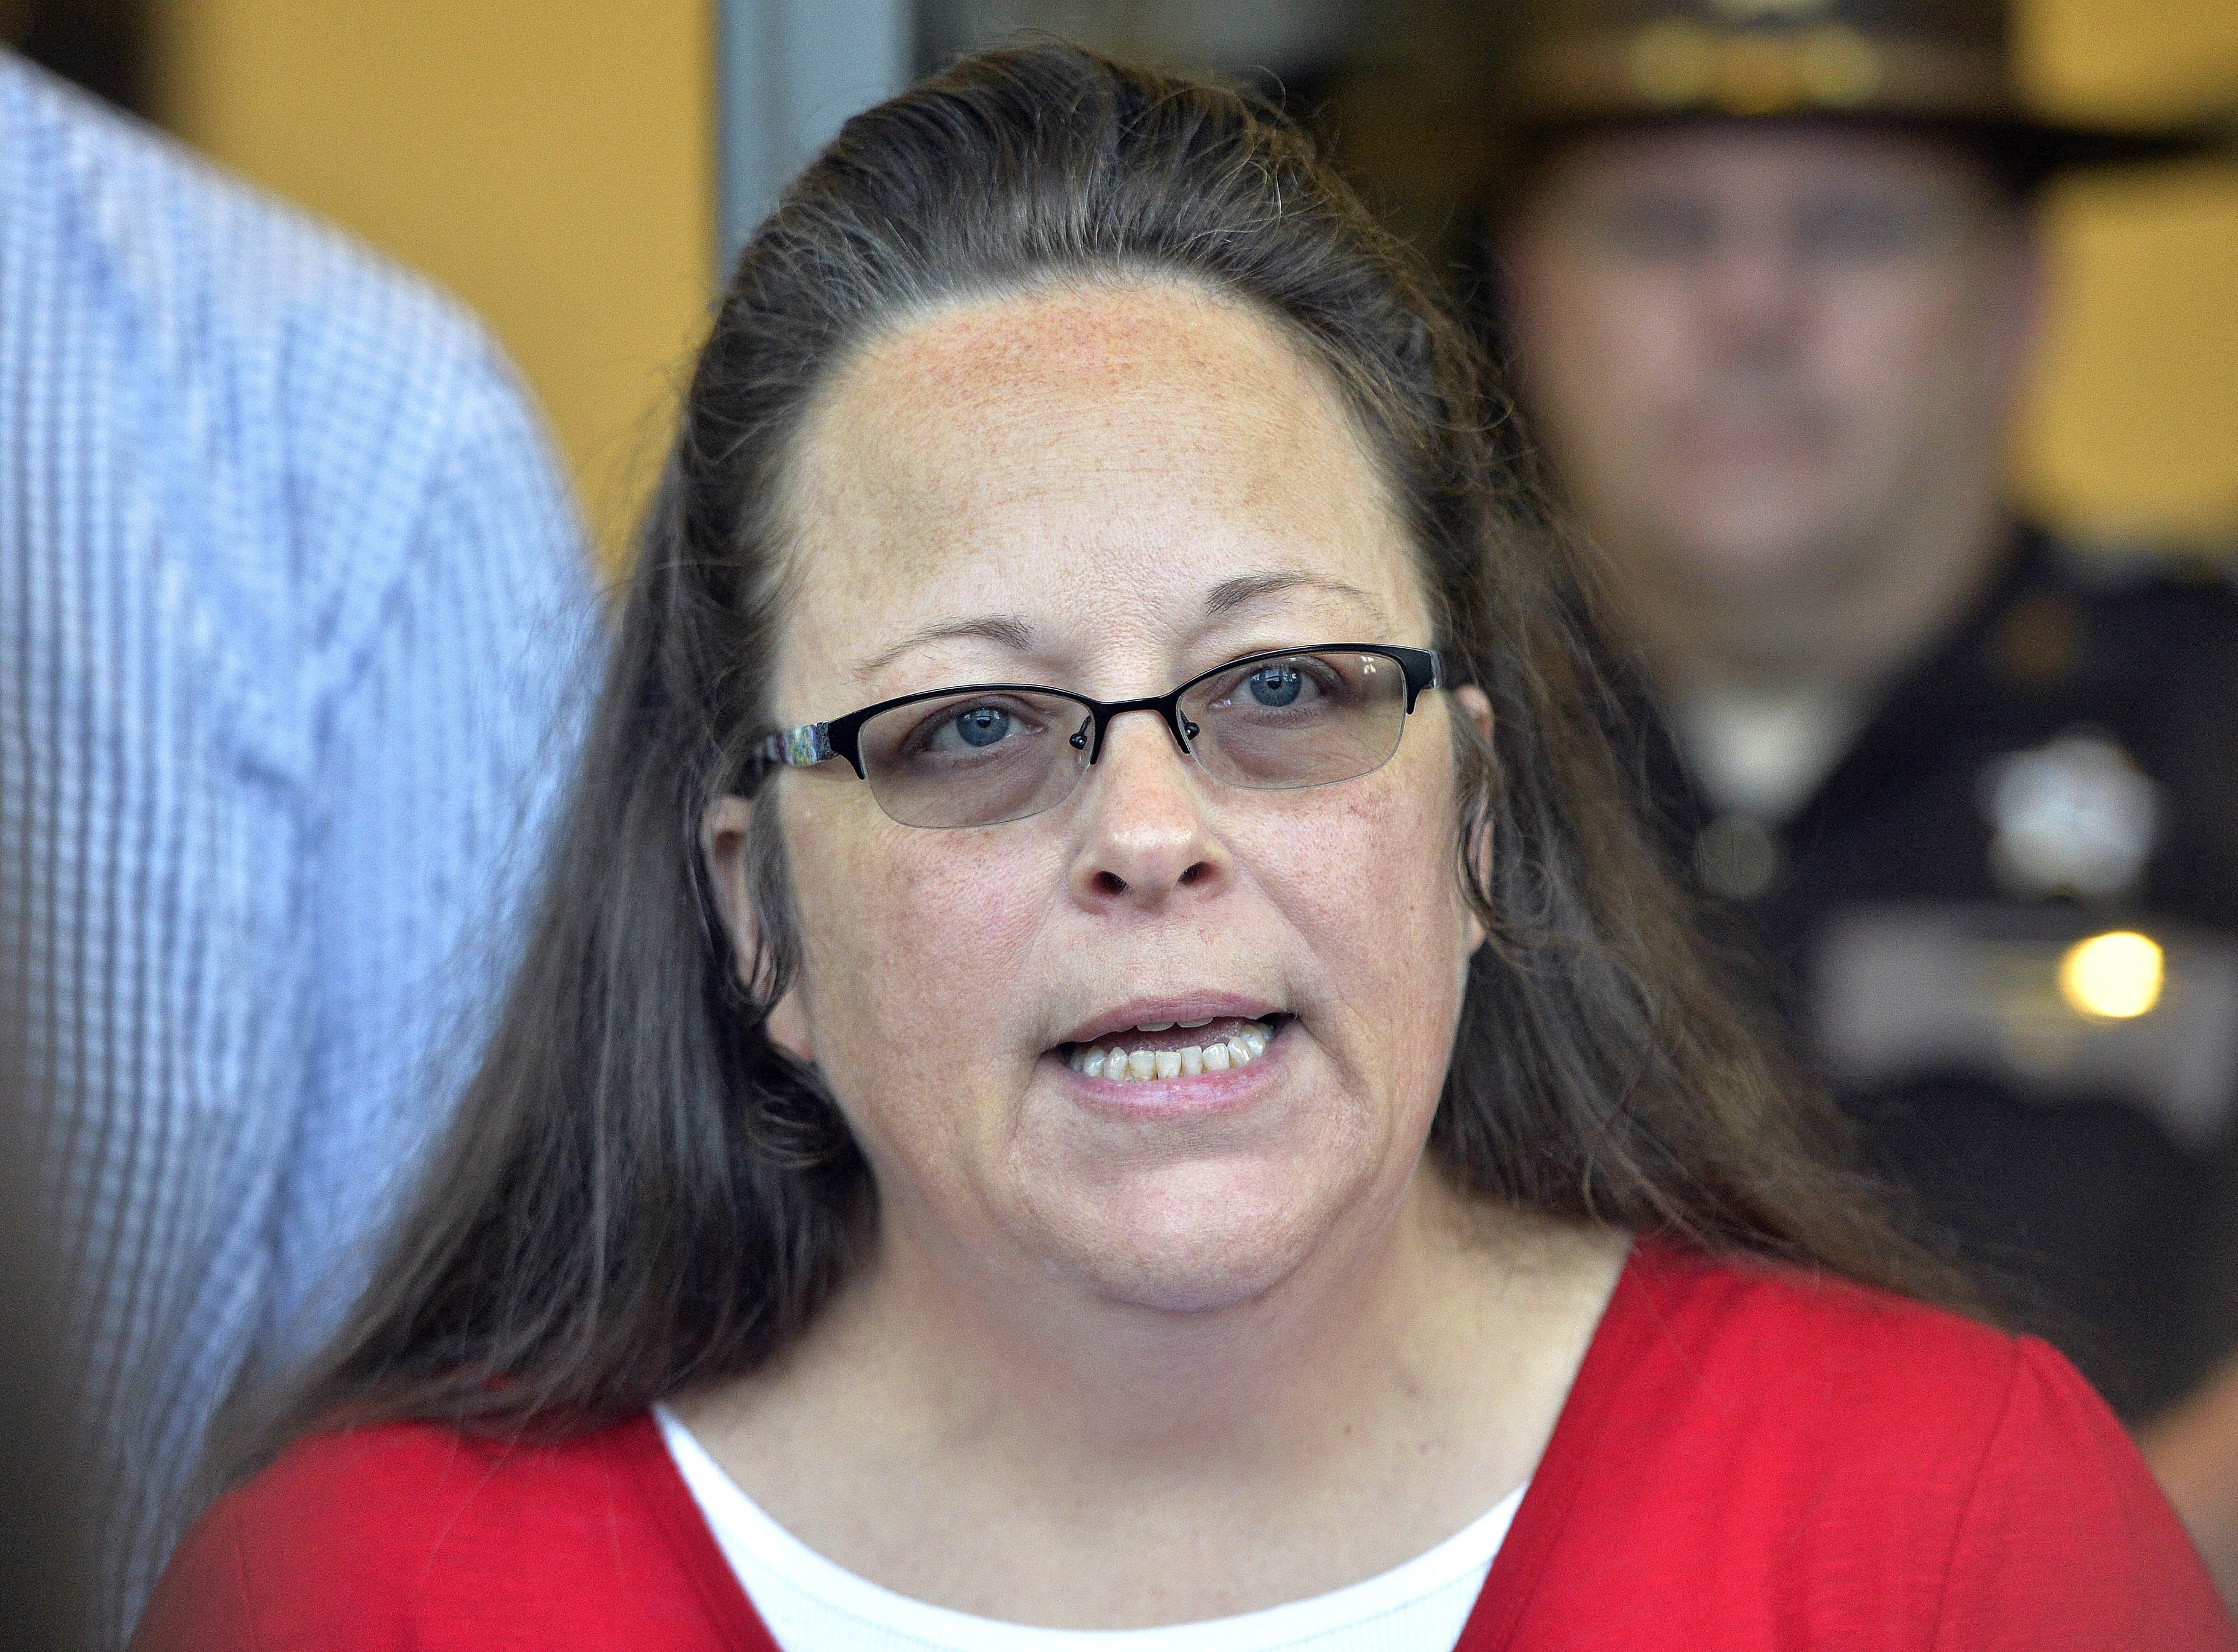 FILE - In this Sept. 14, 2015 file photo, Rowan County Clerk Kim Davis makes a statement to the media at the front door of the Rowan County Judicial Center in Morehead, Ky. On Friday, Oct. 2, 2015. (Timothy D. Easley—AP)